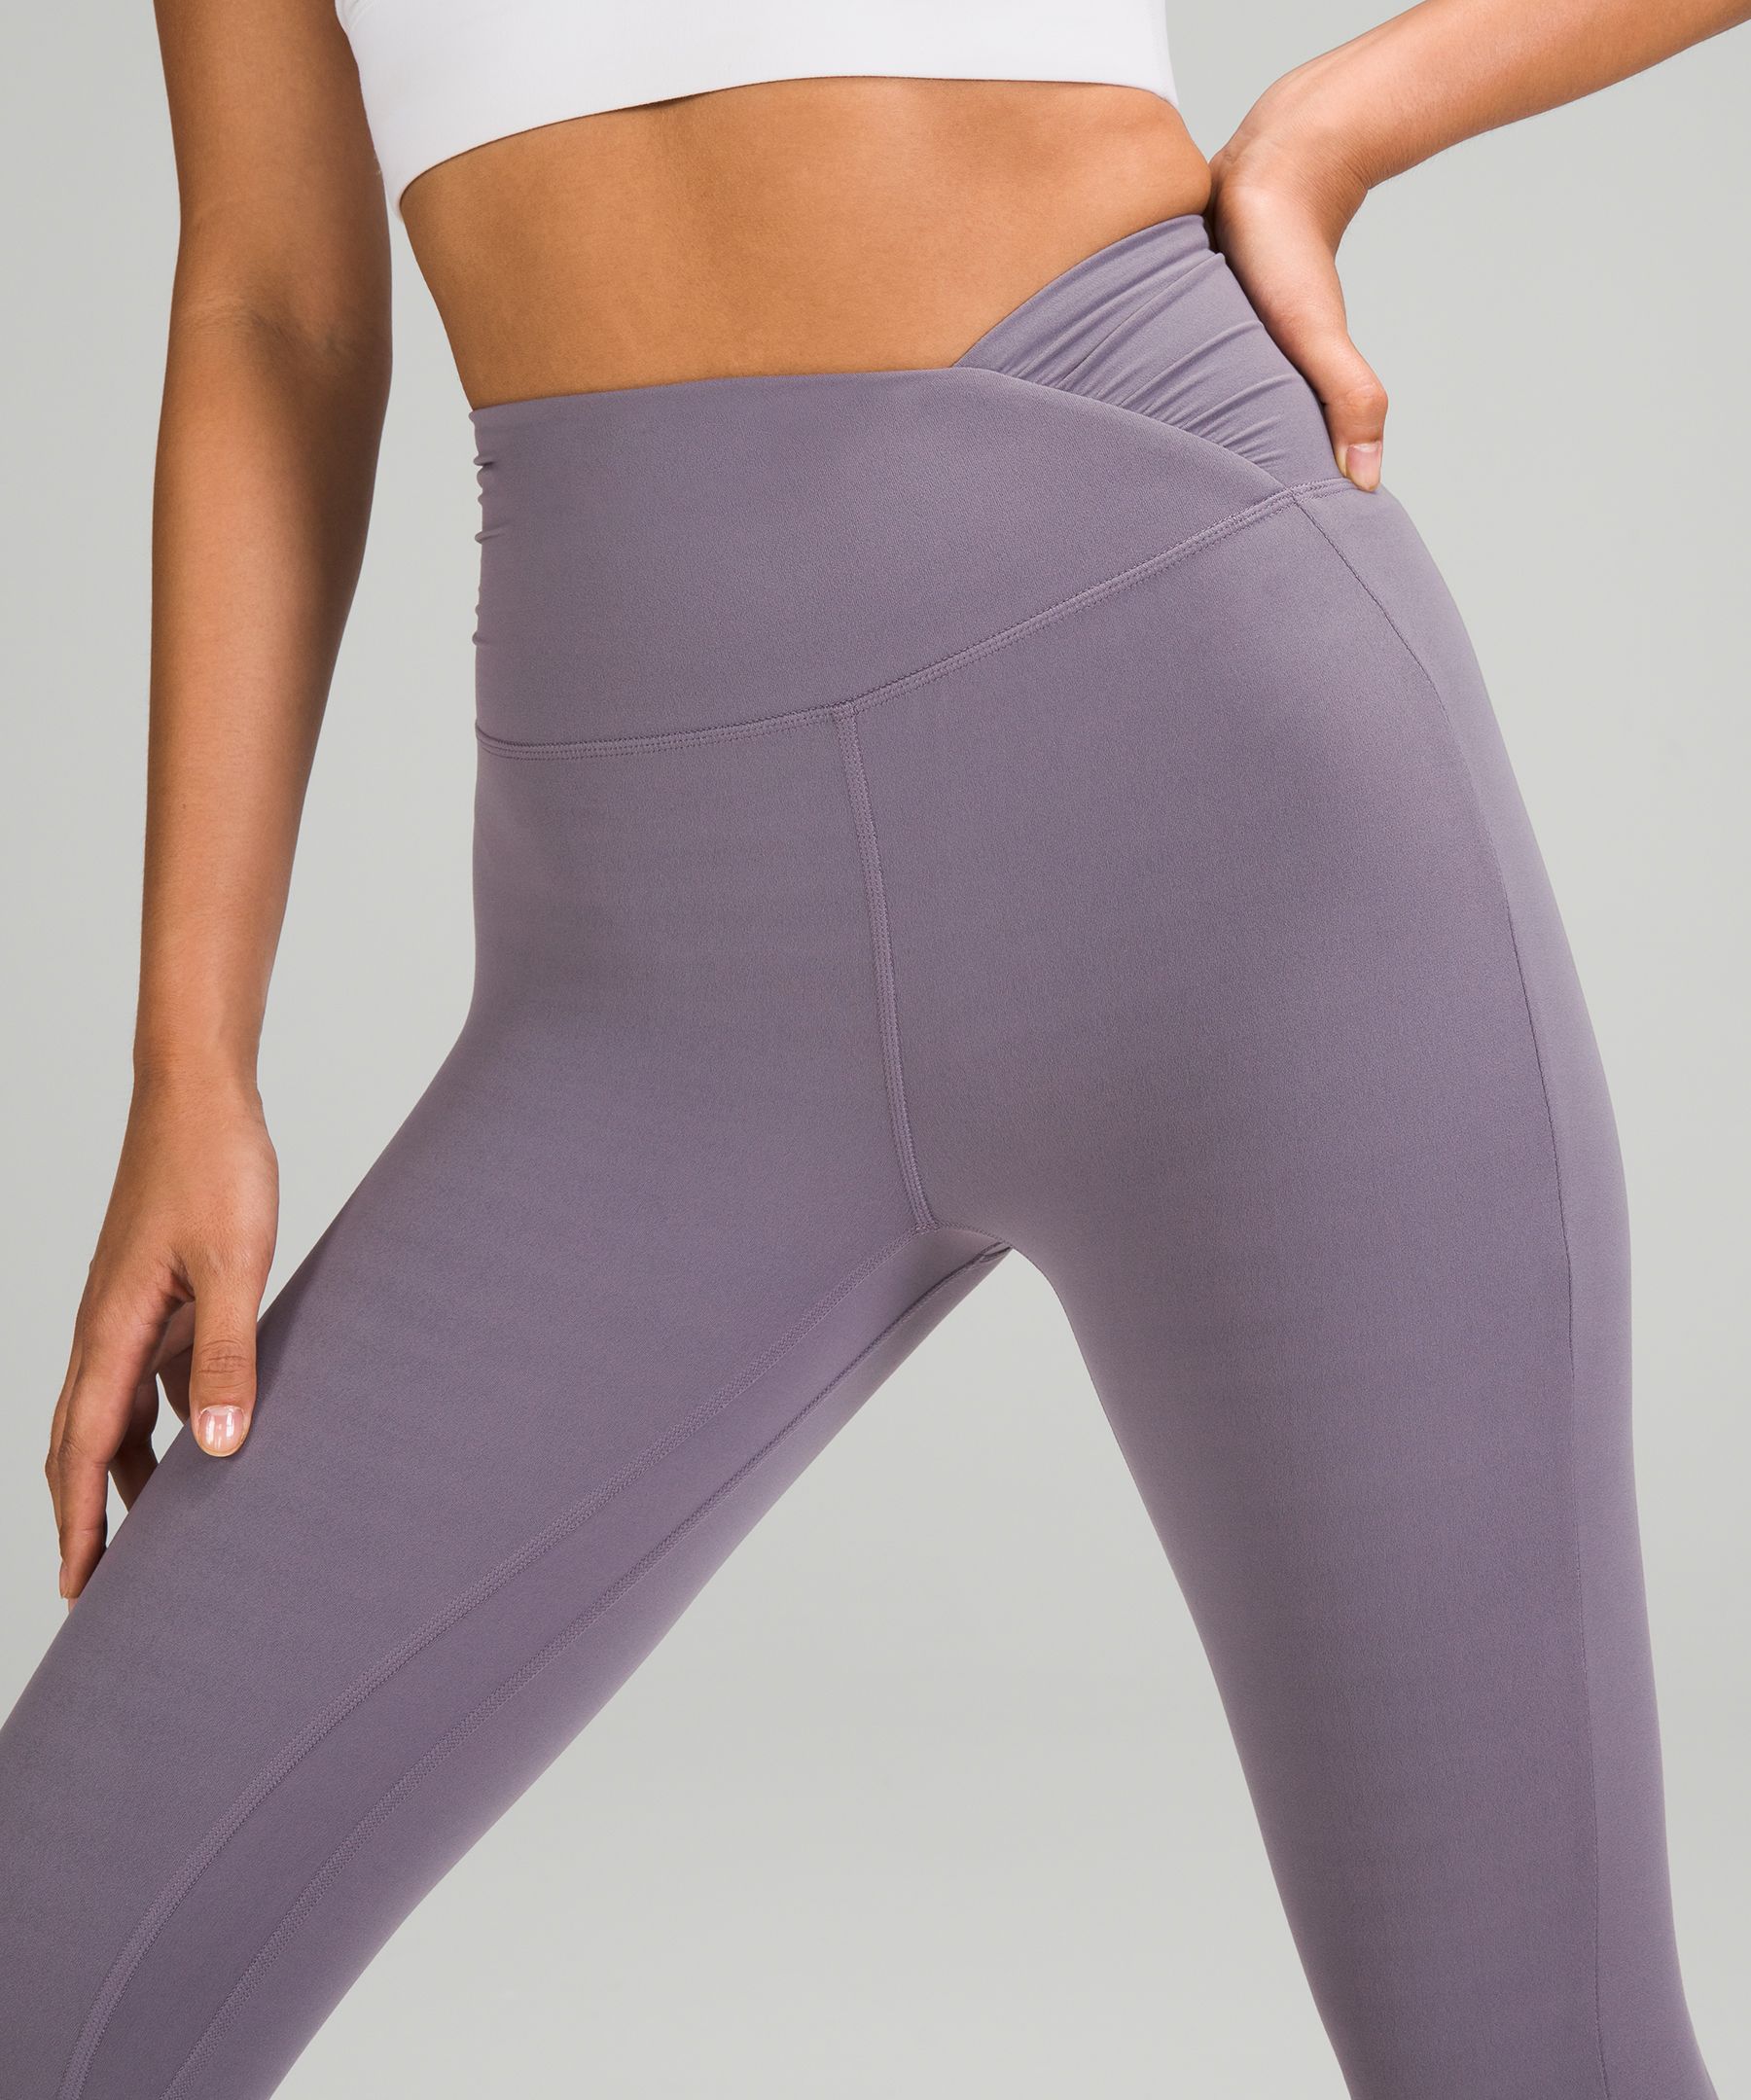 lululemon Align™ Ruched Waist High-Rise Pant 24 *Asia Fit